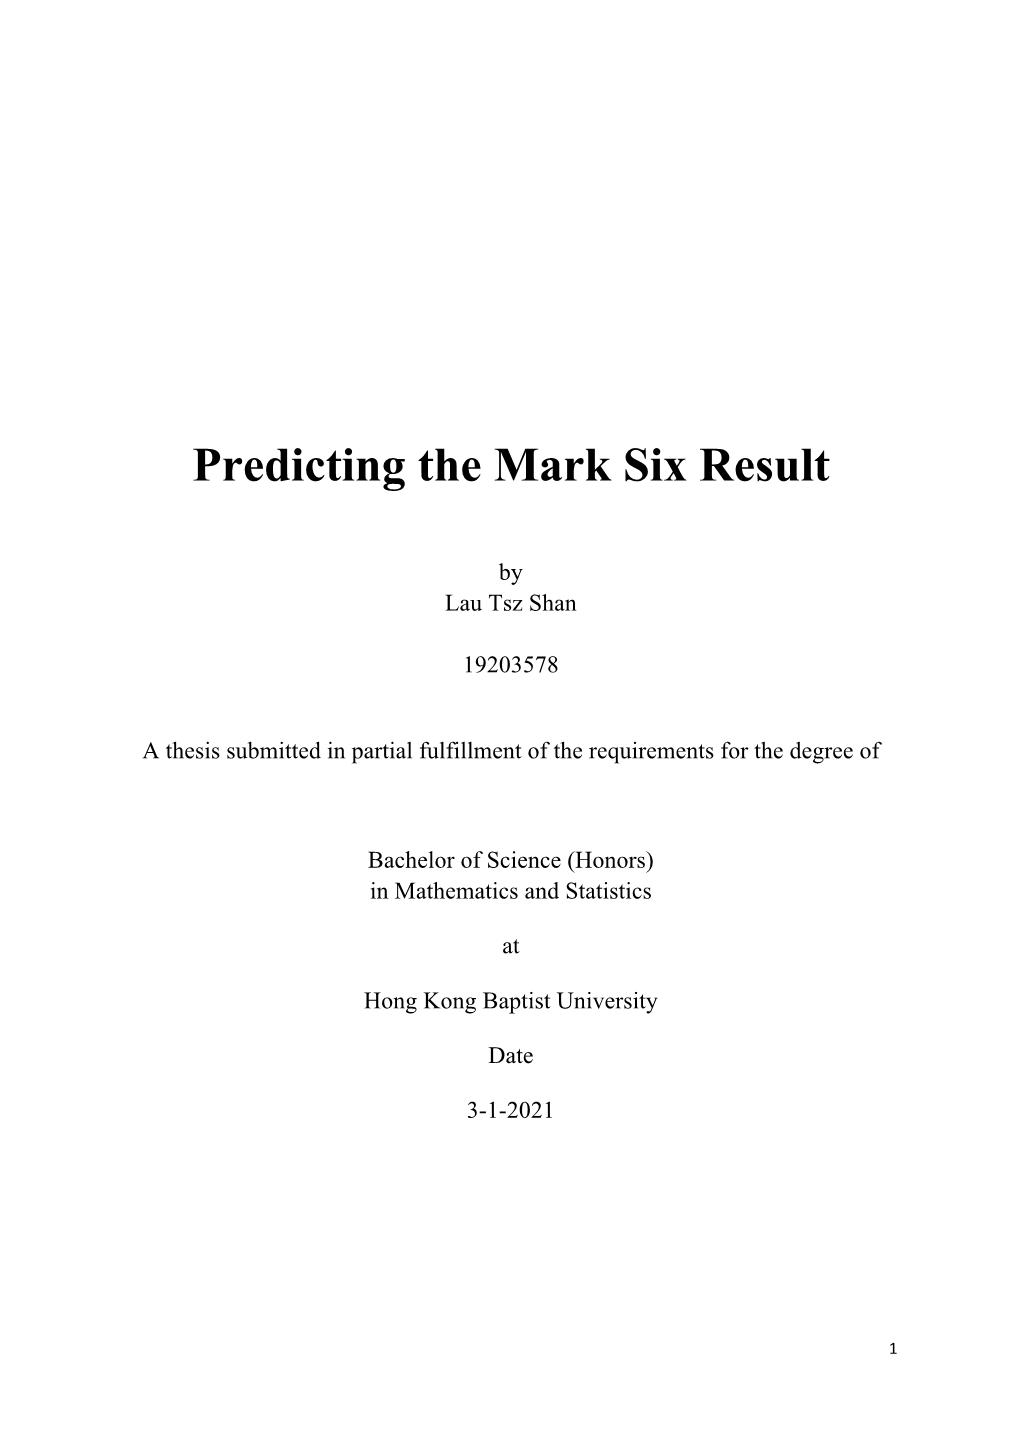 Predicting the Mark Six Result